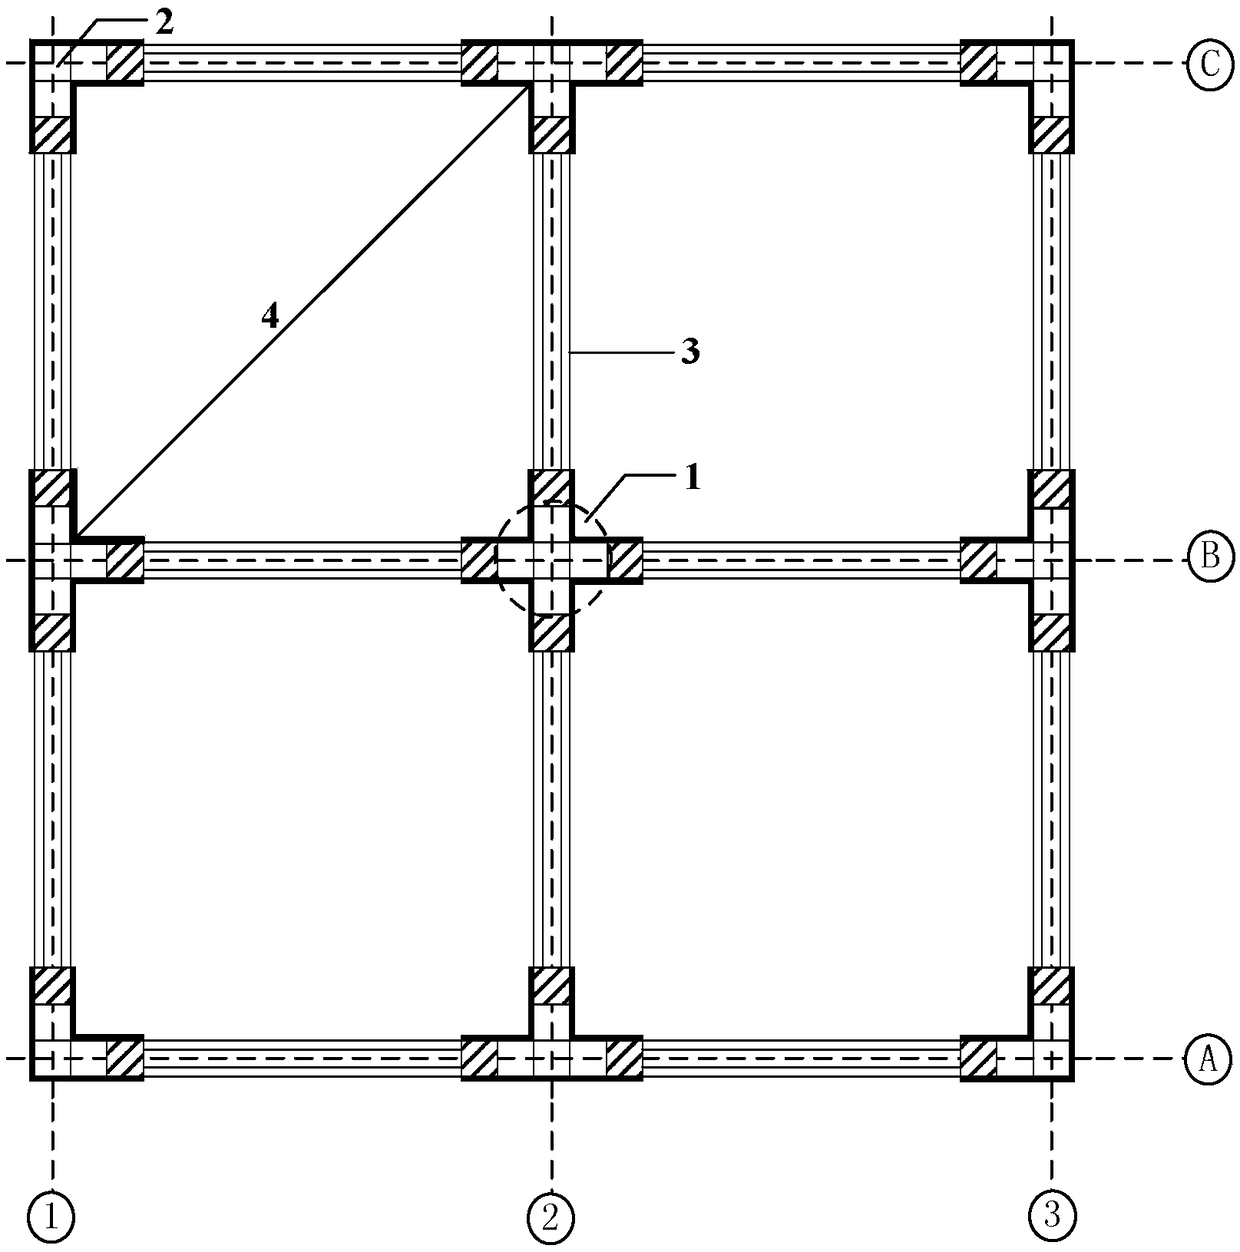 Prefabricated steel-concrete combined beam-column frame structure system